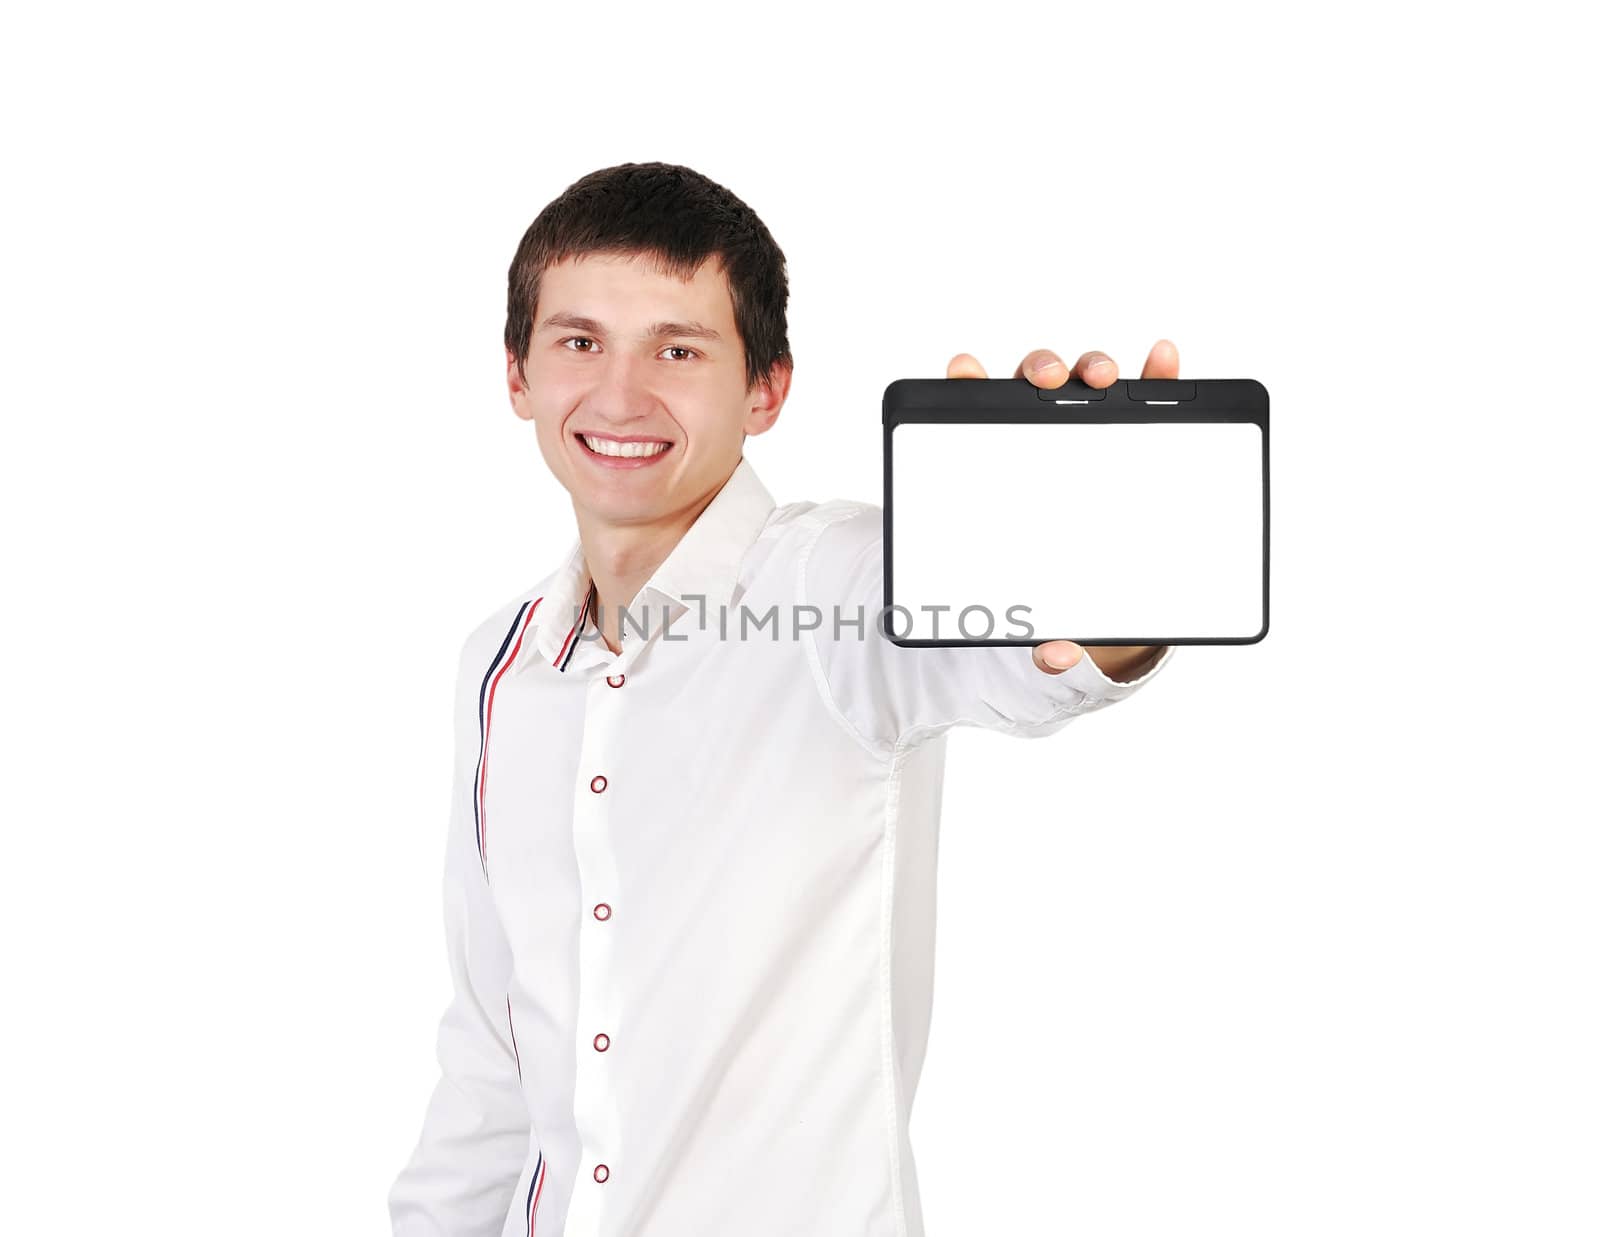 guy with a digital tablet in a hand